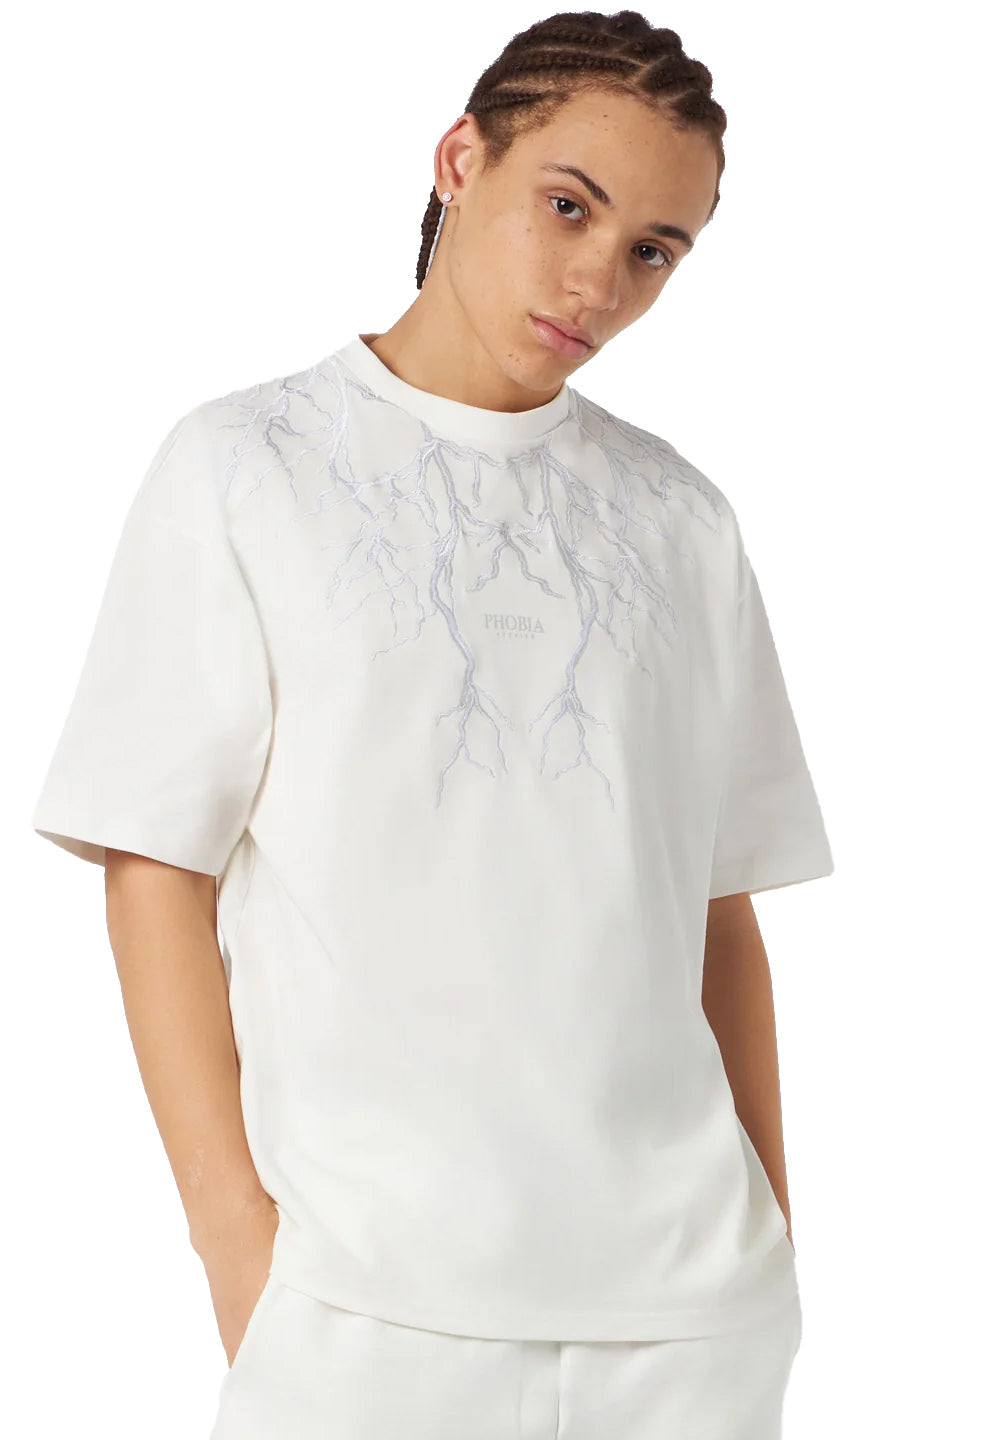 T-shirt with Embroidery Lightning